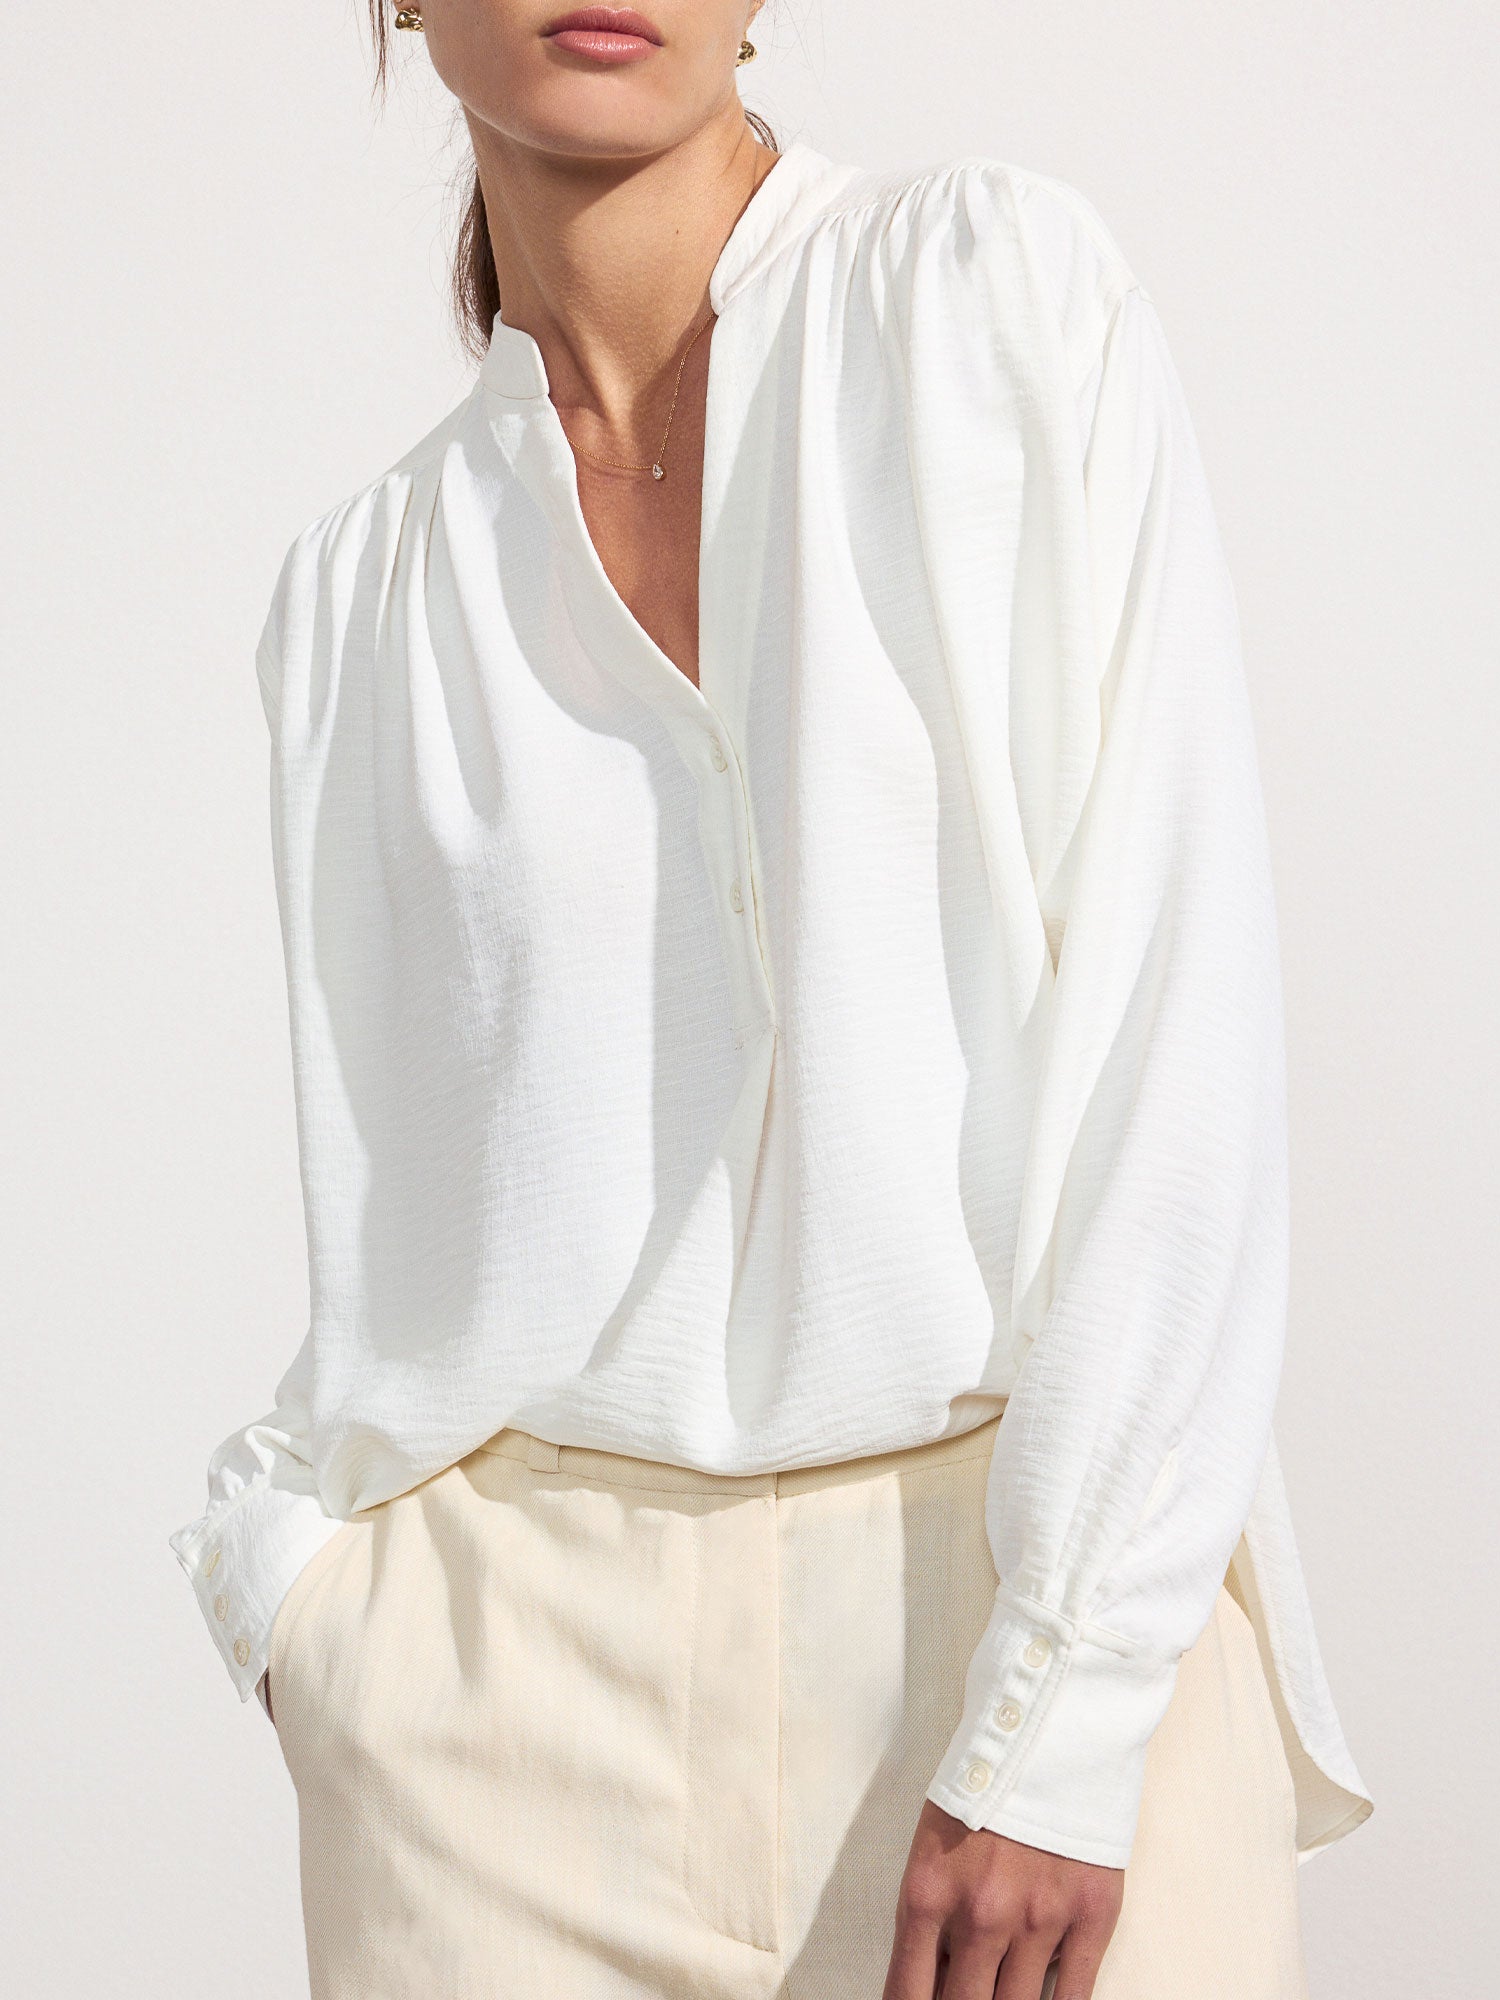 Soro v-neck long sleeve white top front view